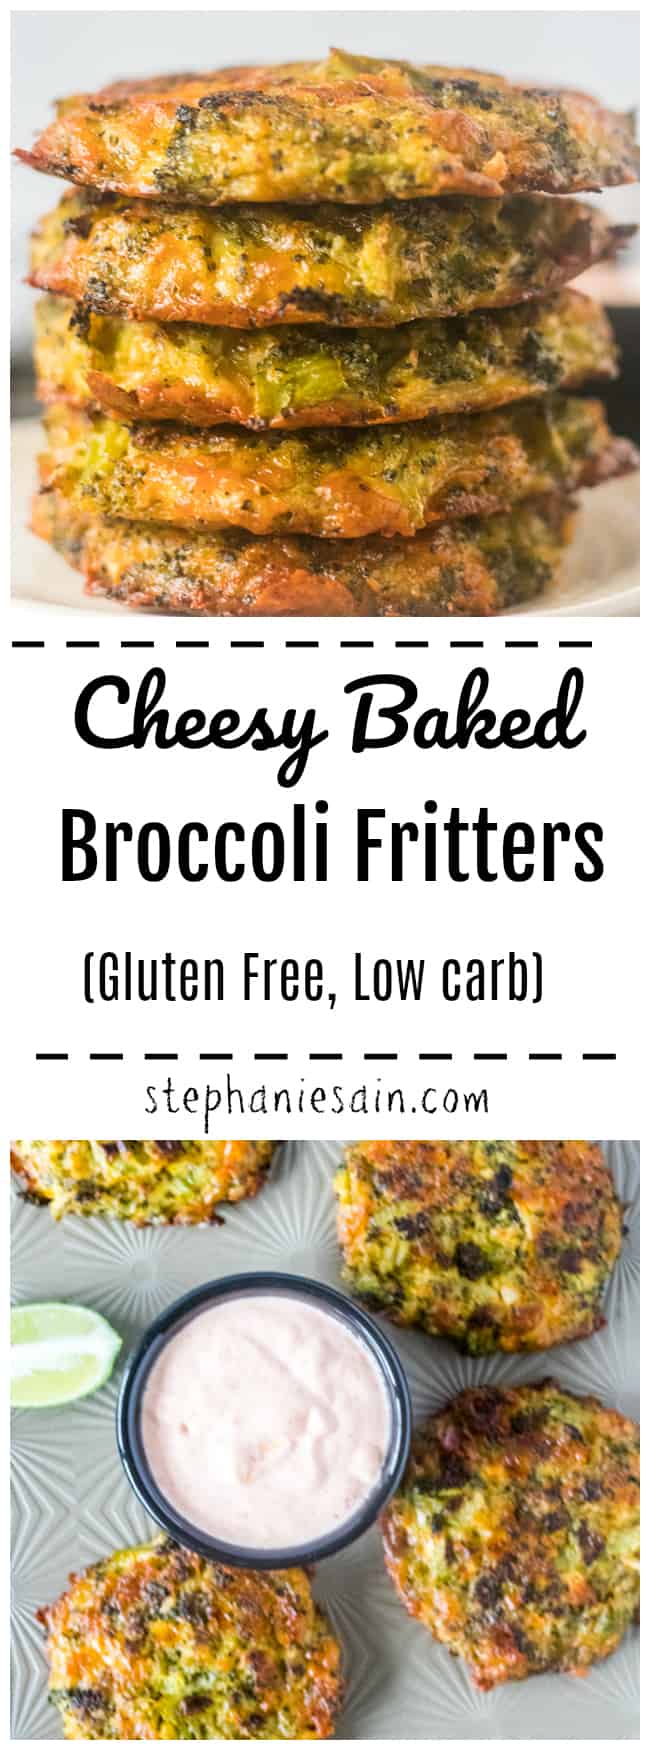 These Broccoli Fritters are oven baked, cheesy and delicious. Easy to make in one bowl with only five ingredients. Great for snacks, appetizers or a side. Serve with your favorite dipping sauce. Gluten Free, Low Carb.